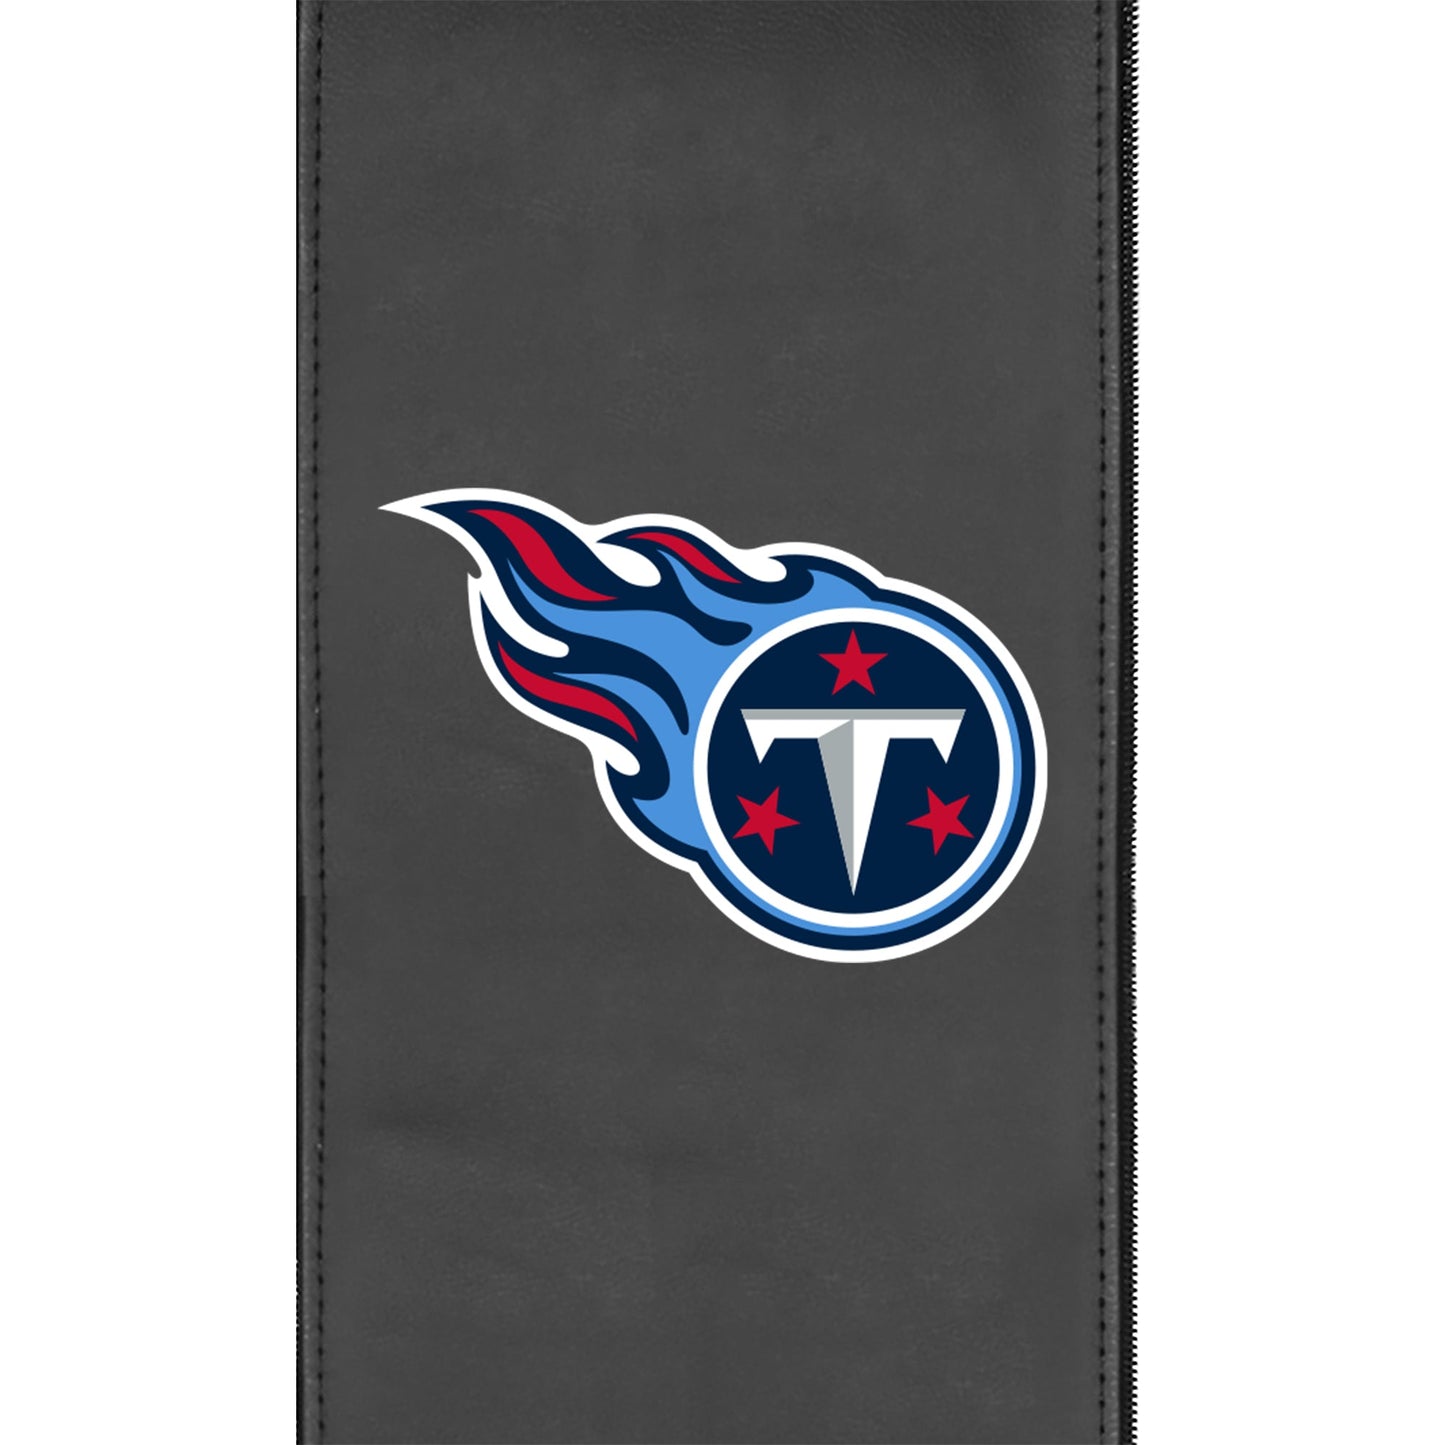 Side Chair 2000 with  Tennessee Titans Primary Logo Set of 2